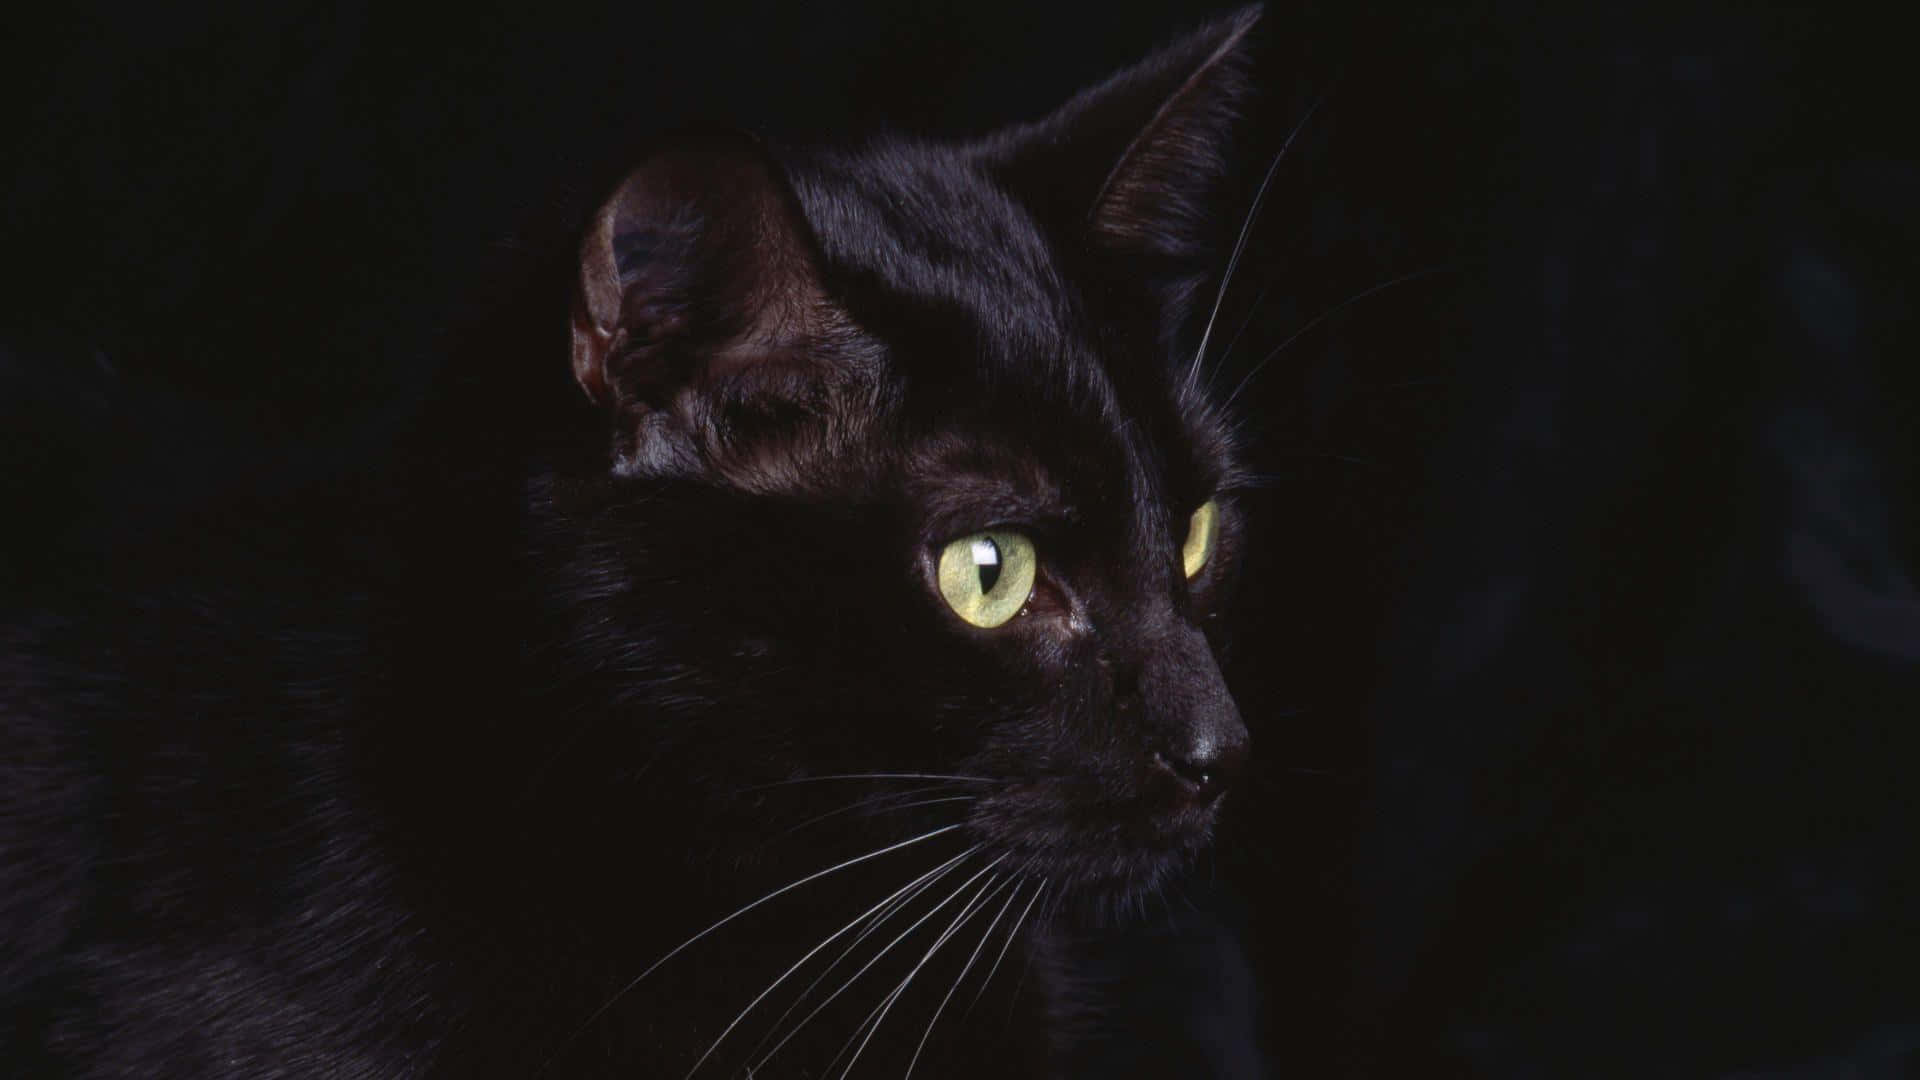 A Black Cat With Green Eyes Is Staring At The Camera